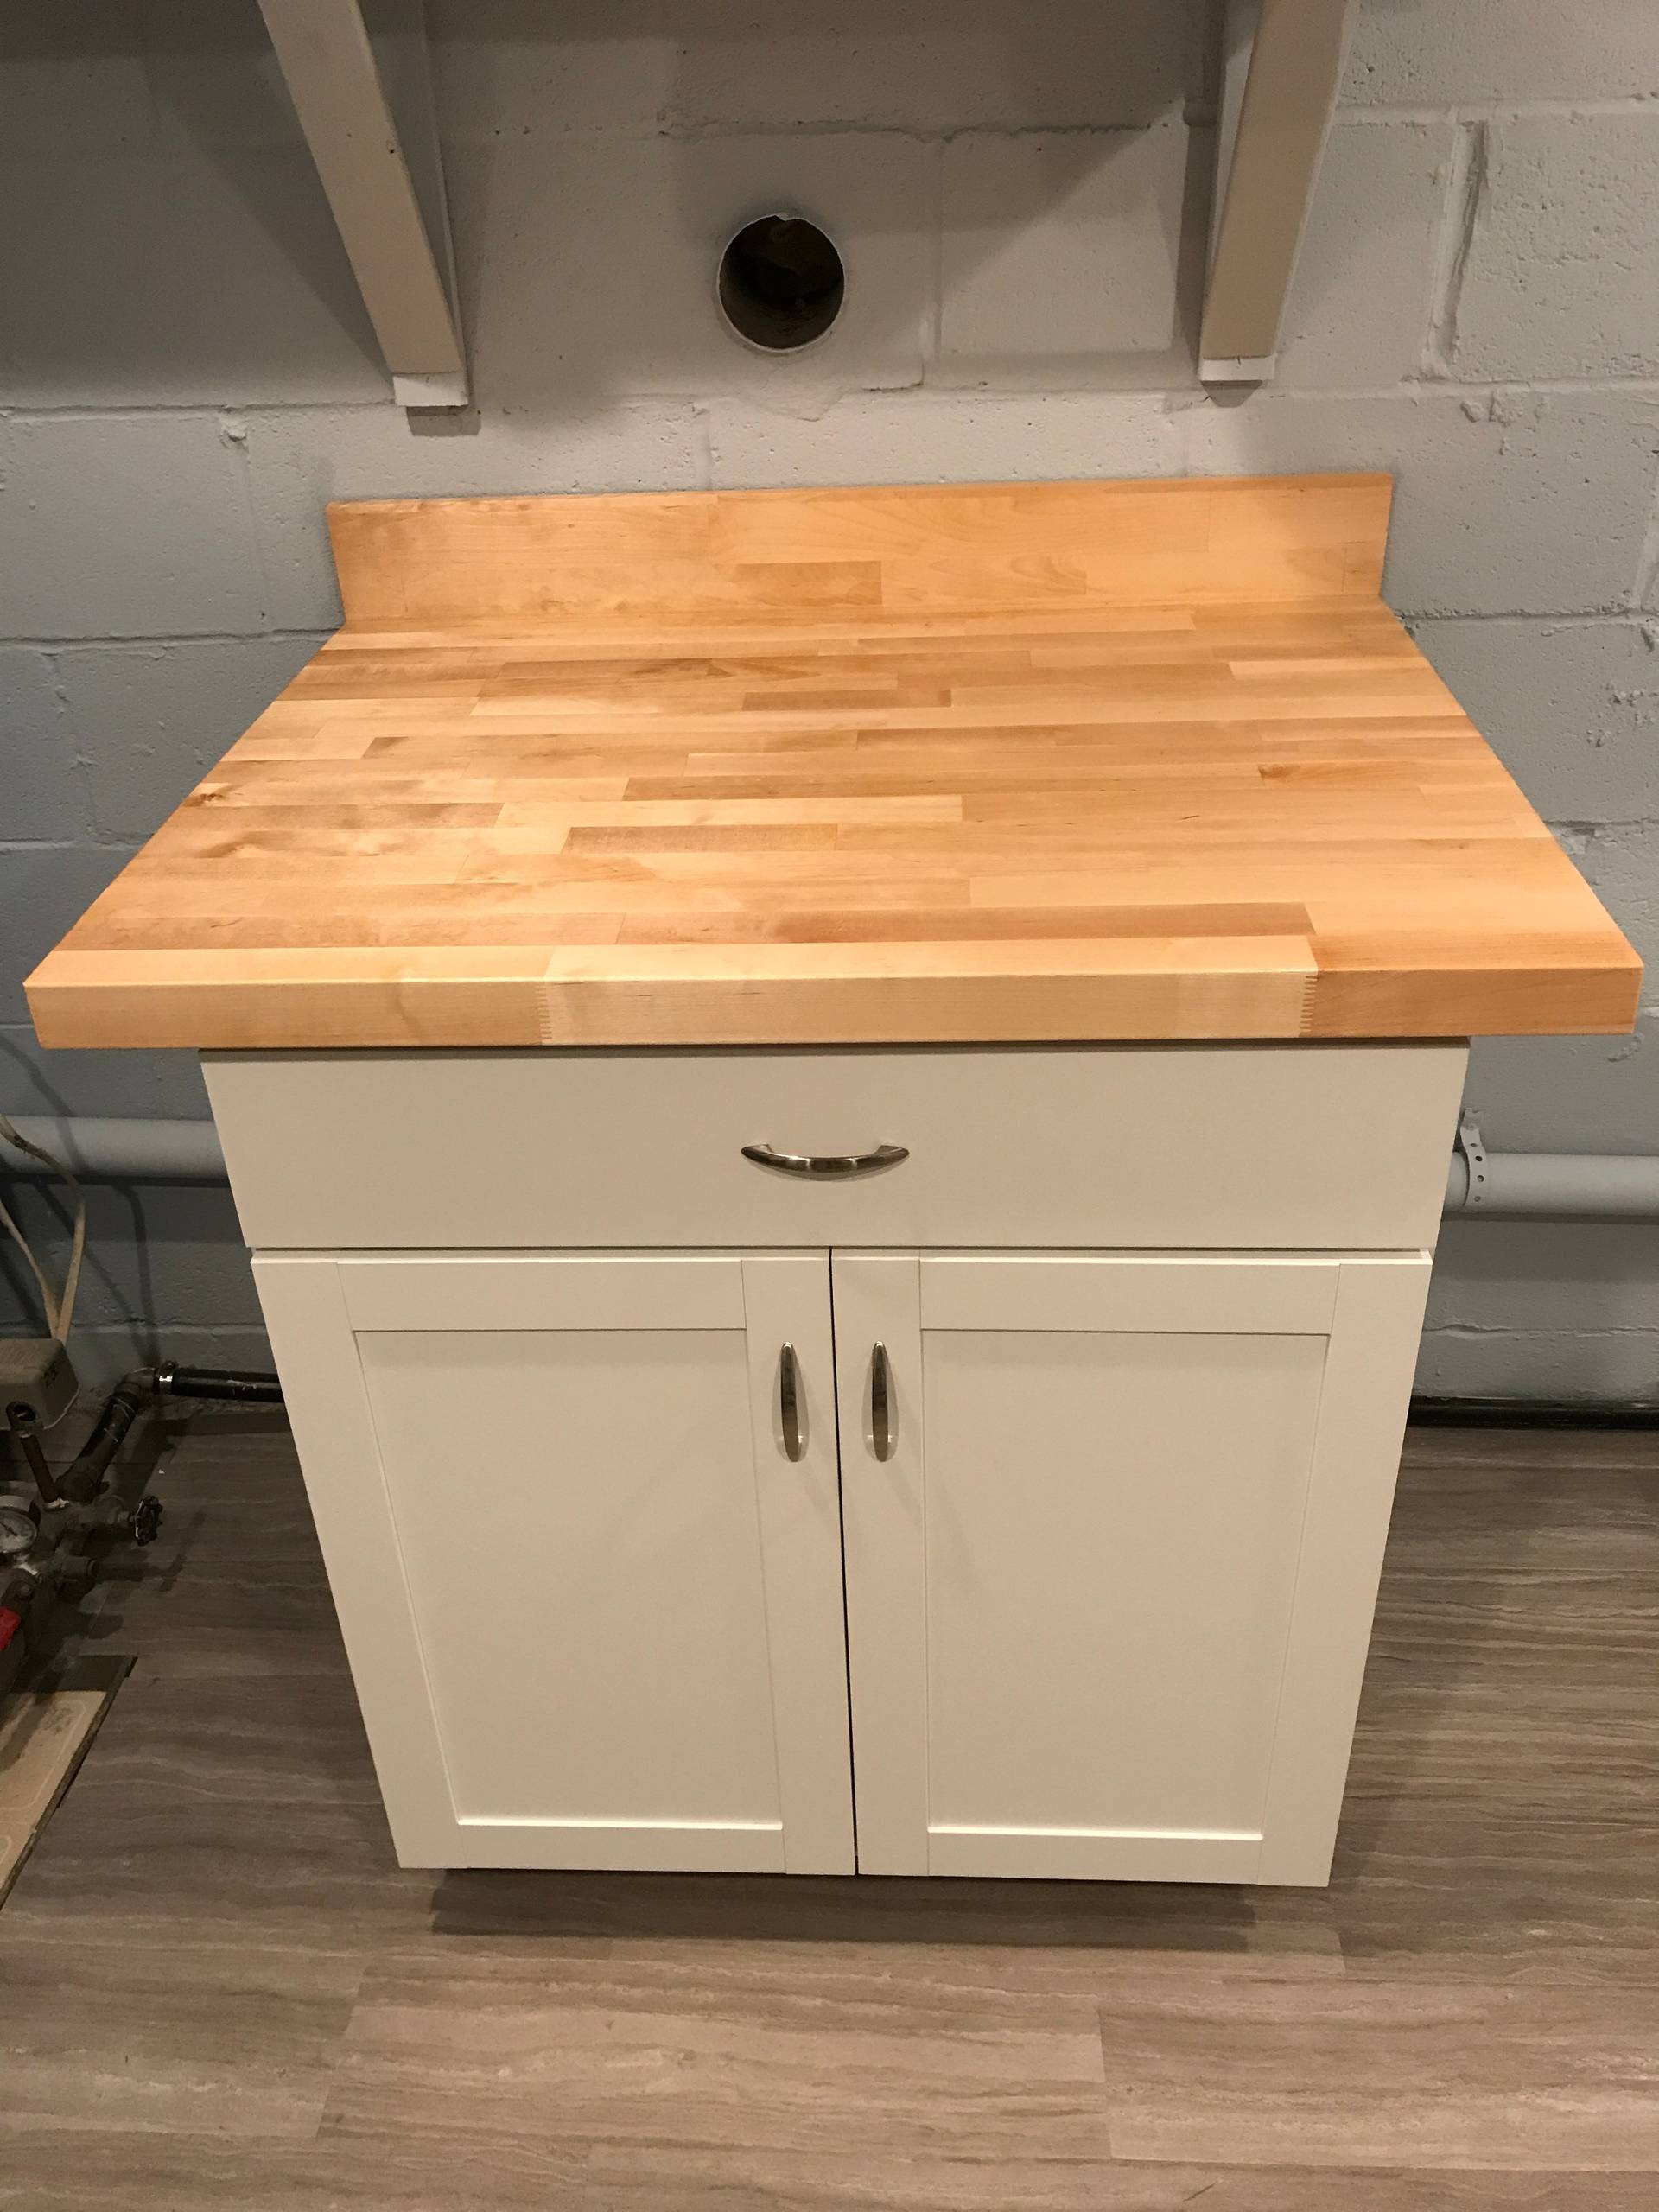 Laundry Room Makeover